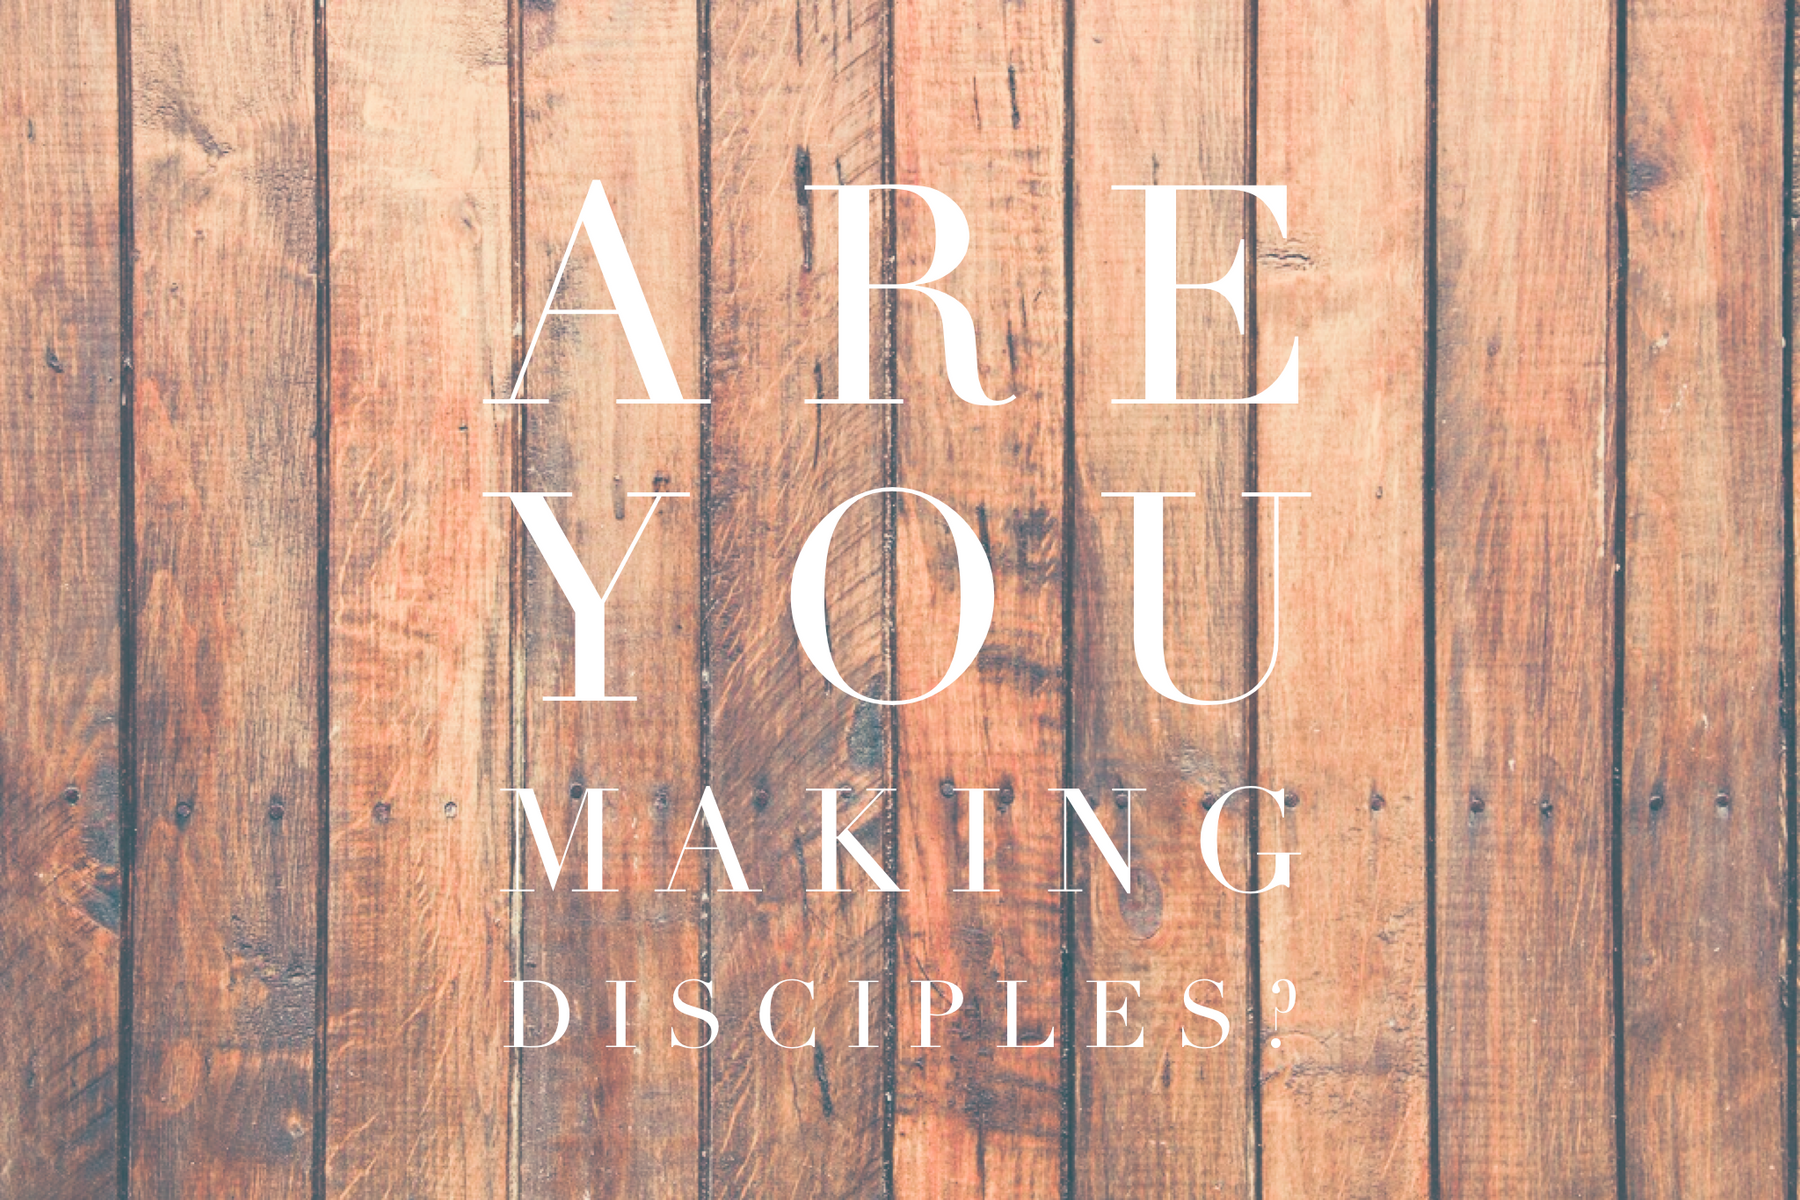 If You're Not Making Disciples, What Are You Making?